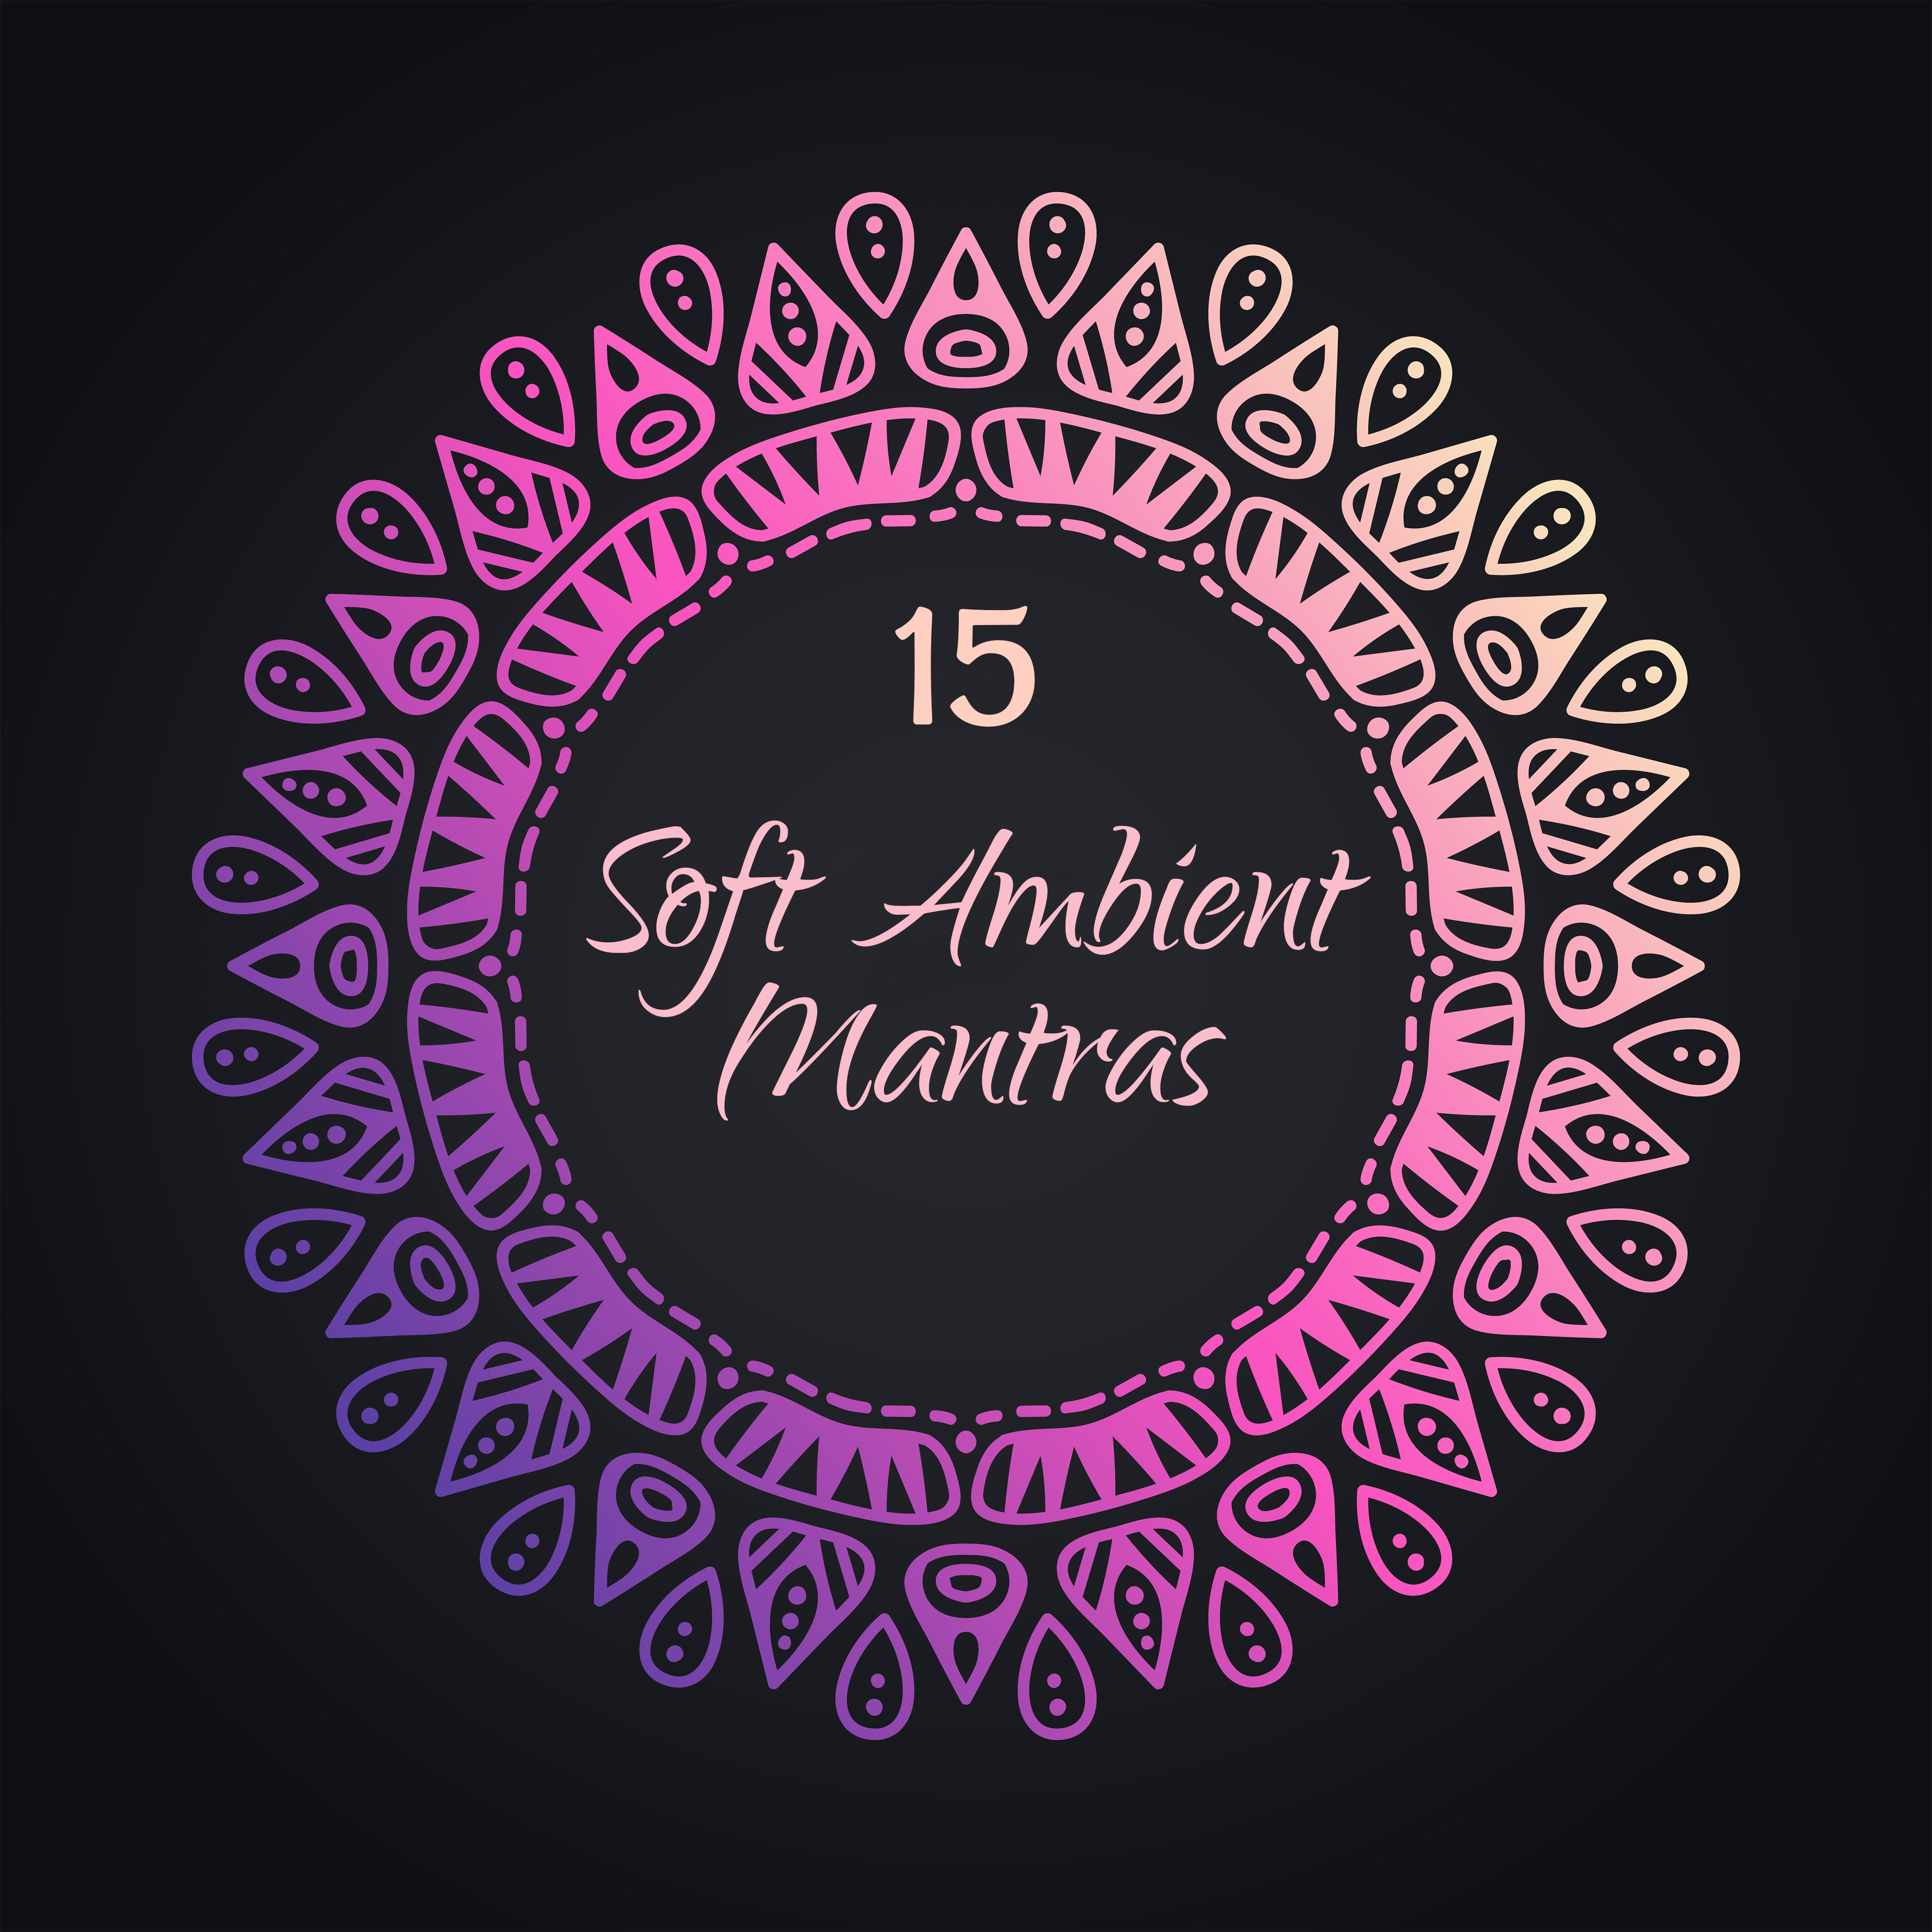 15 Soft Ambient Mantras